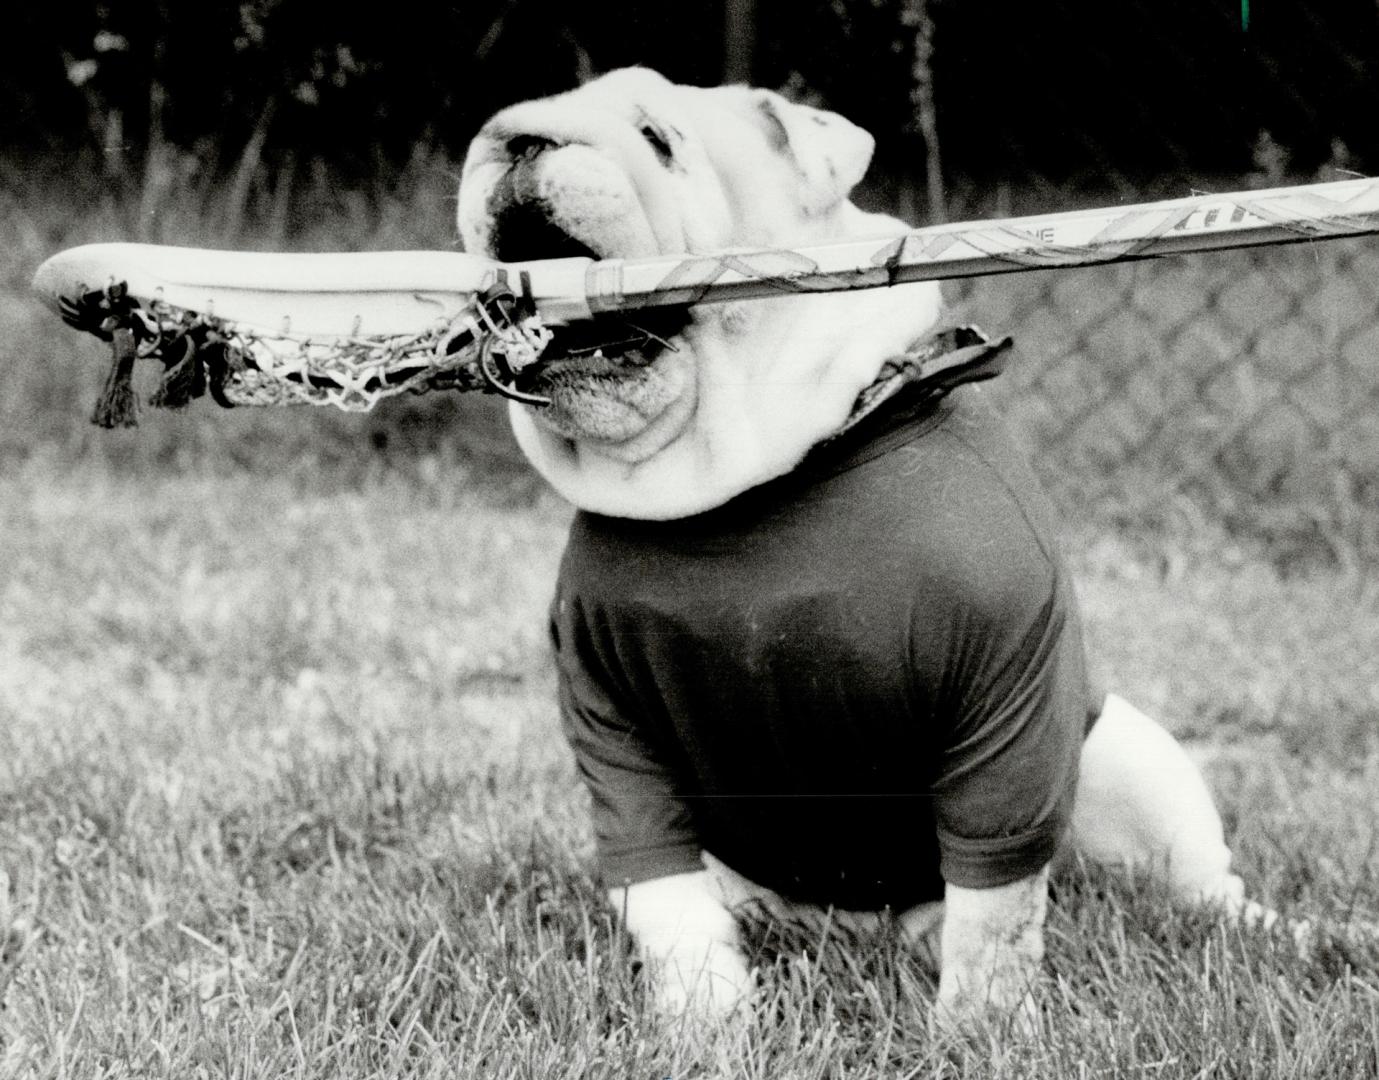 Bogart, the Canadian field lacrosse team's mascot, is all prepared to join in the action at the University of Toronto tryout camp